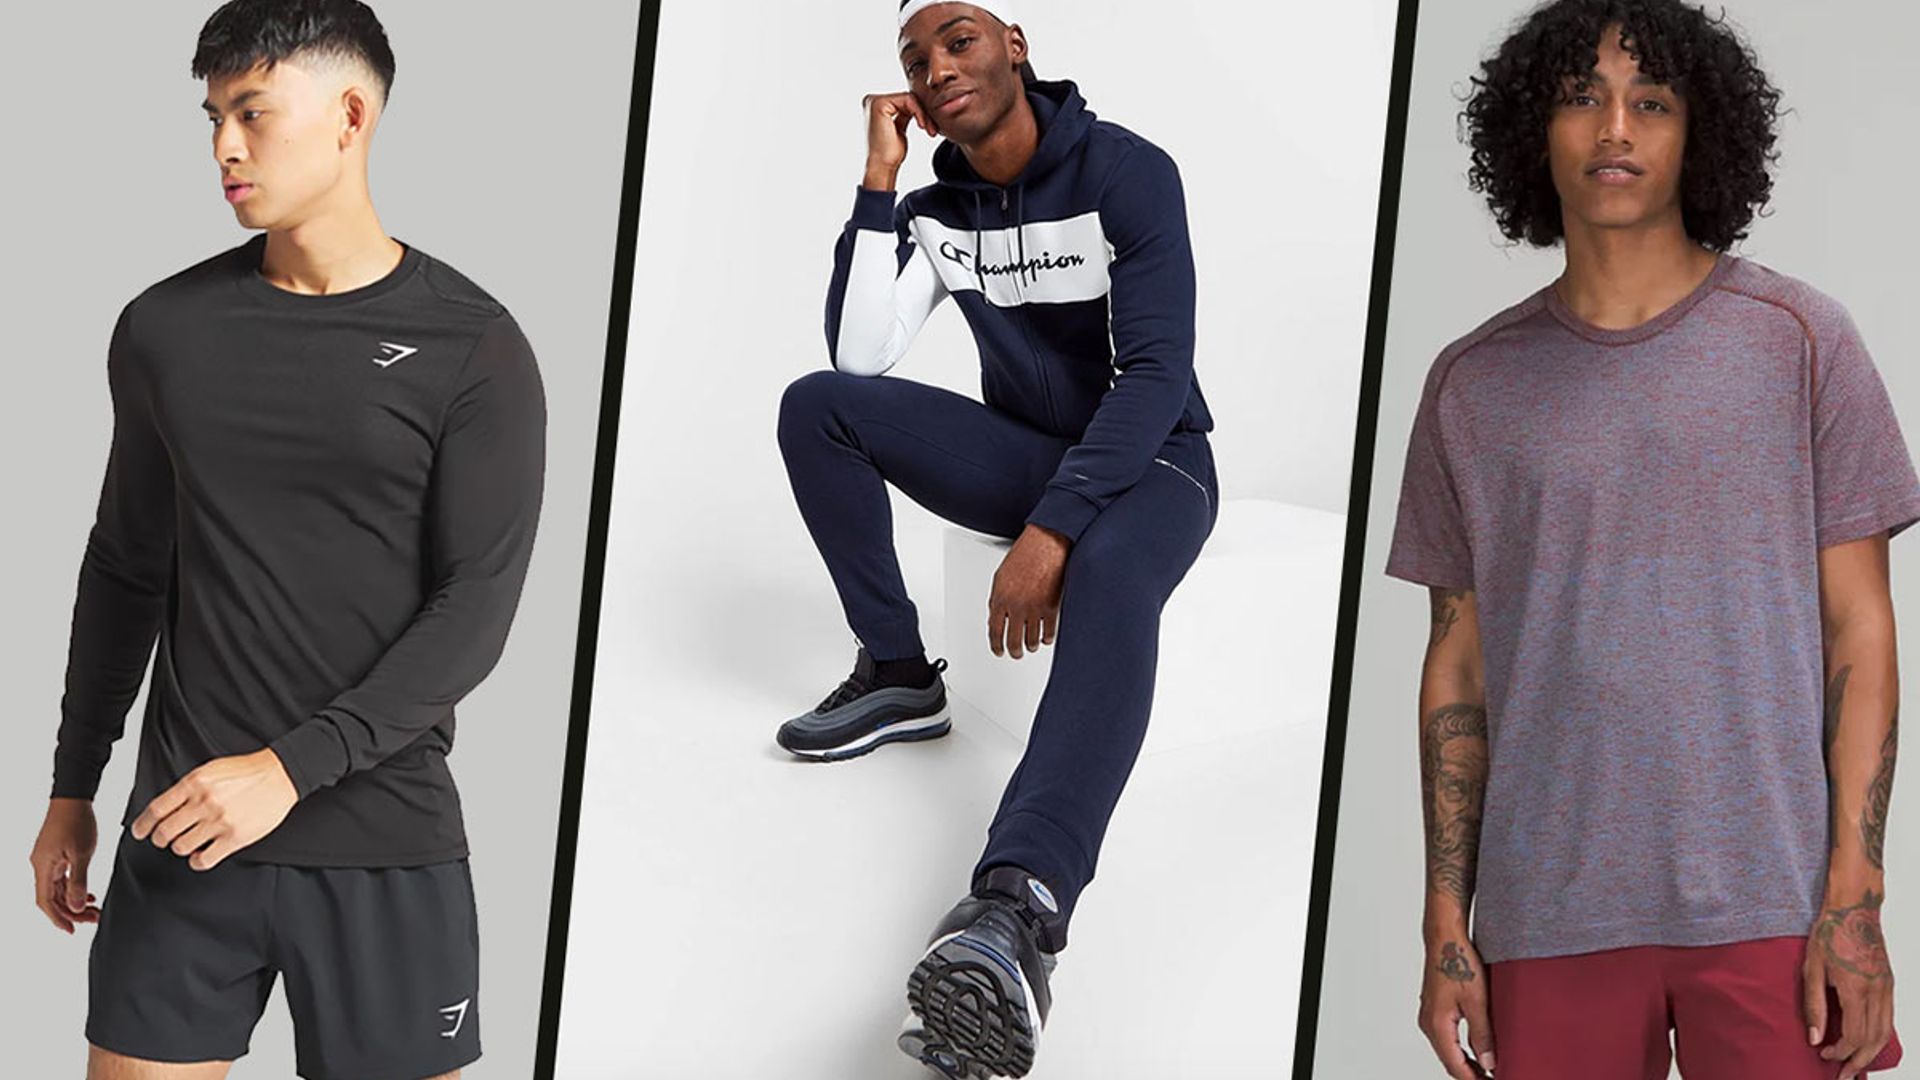 Men's sportswear he'll love for fitness (or let's face it, lounging) in 2022